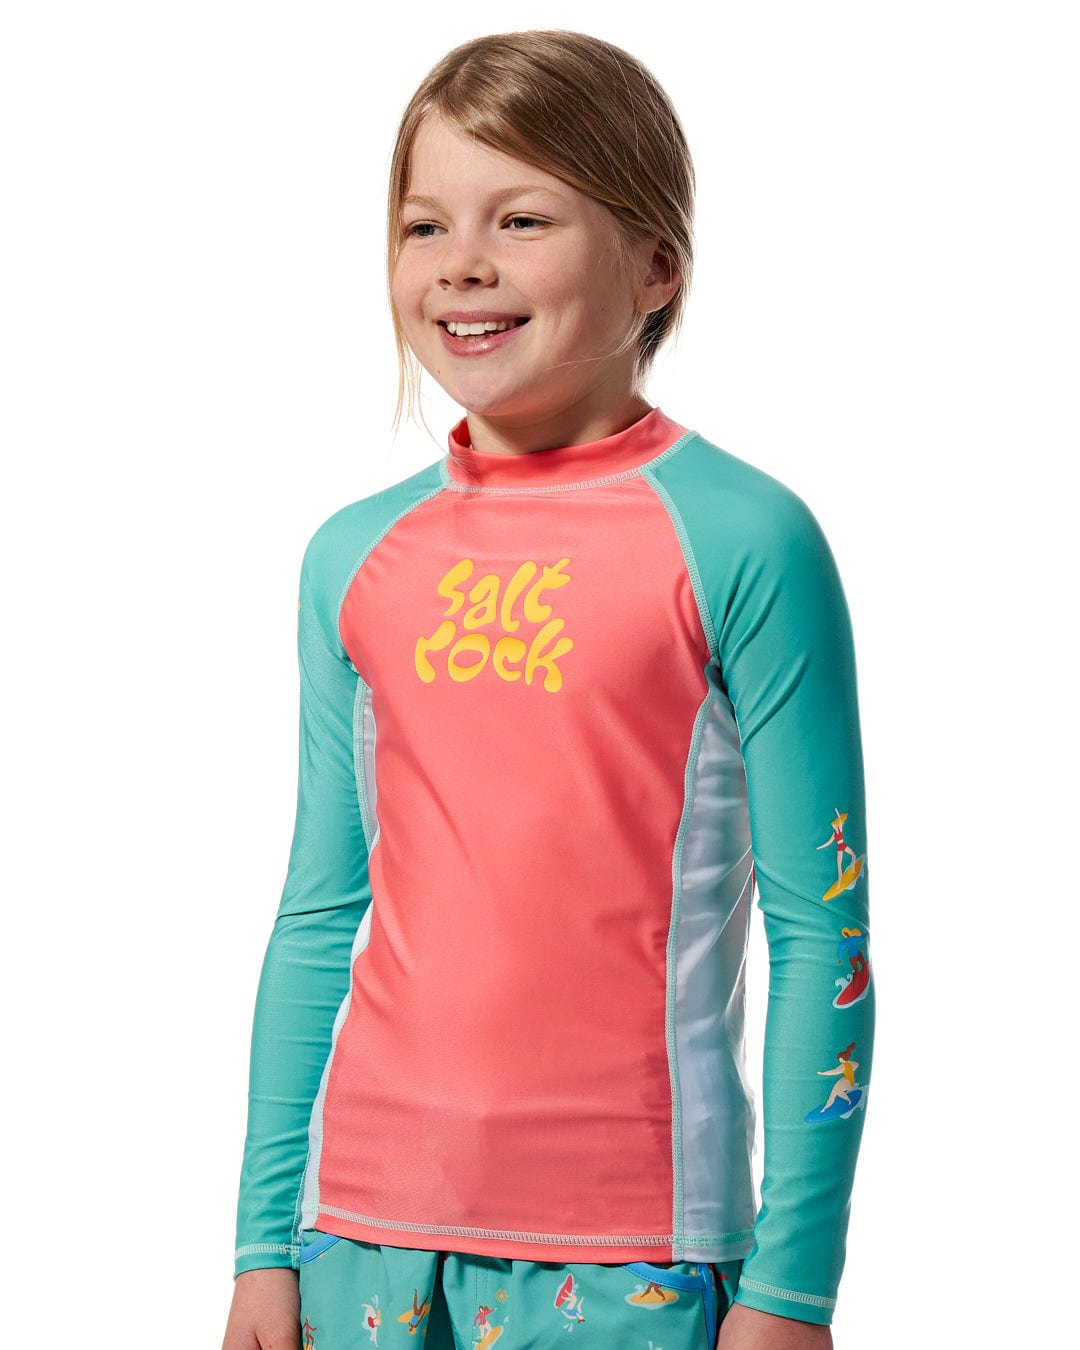 A girl wearing a Surf Sister - Kids Long Sleeve Rashvest - Coral/Turquoise by Saltrock.